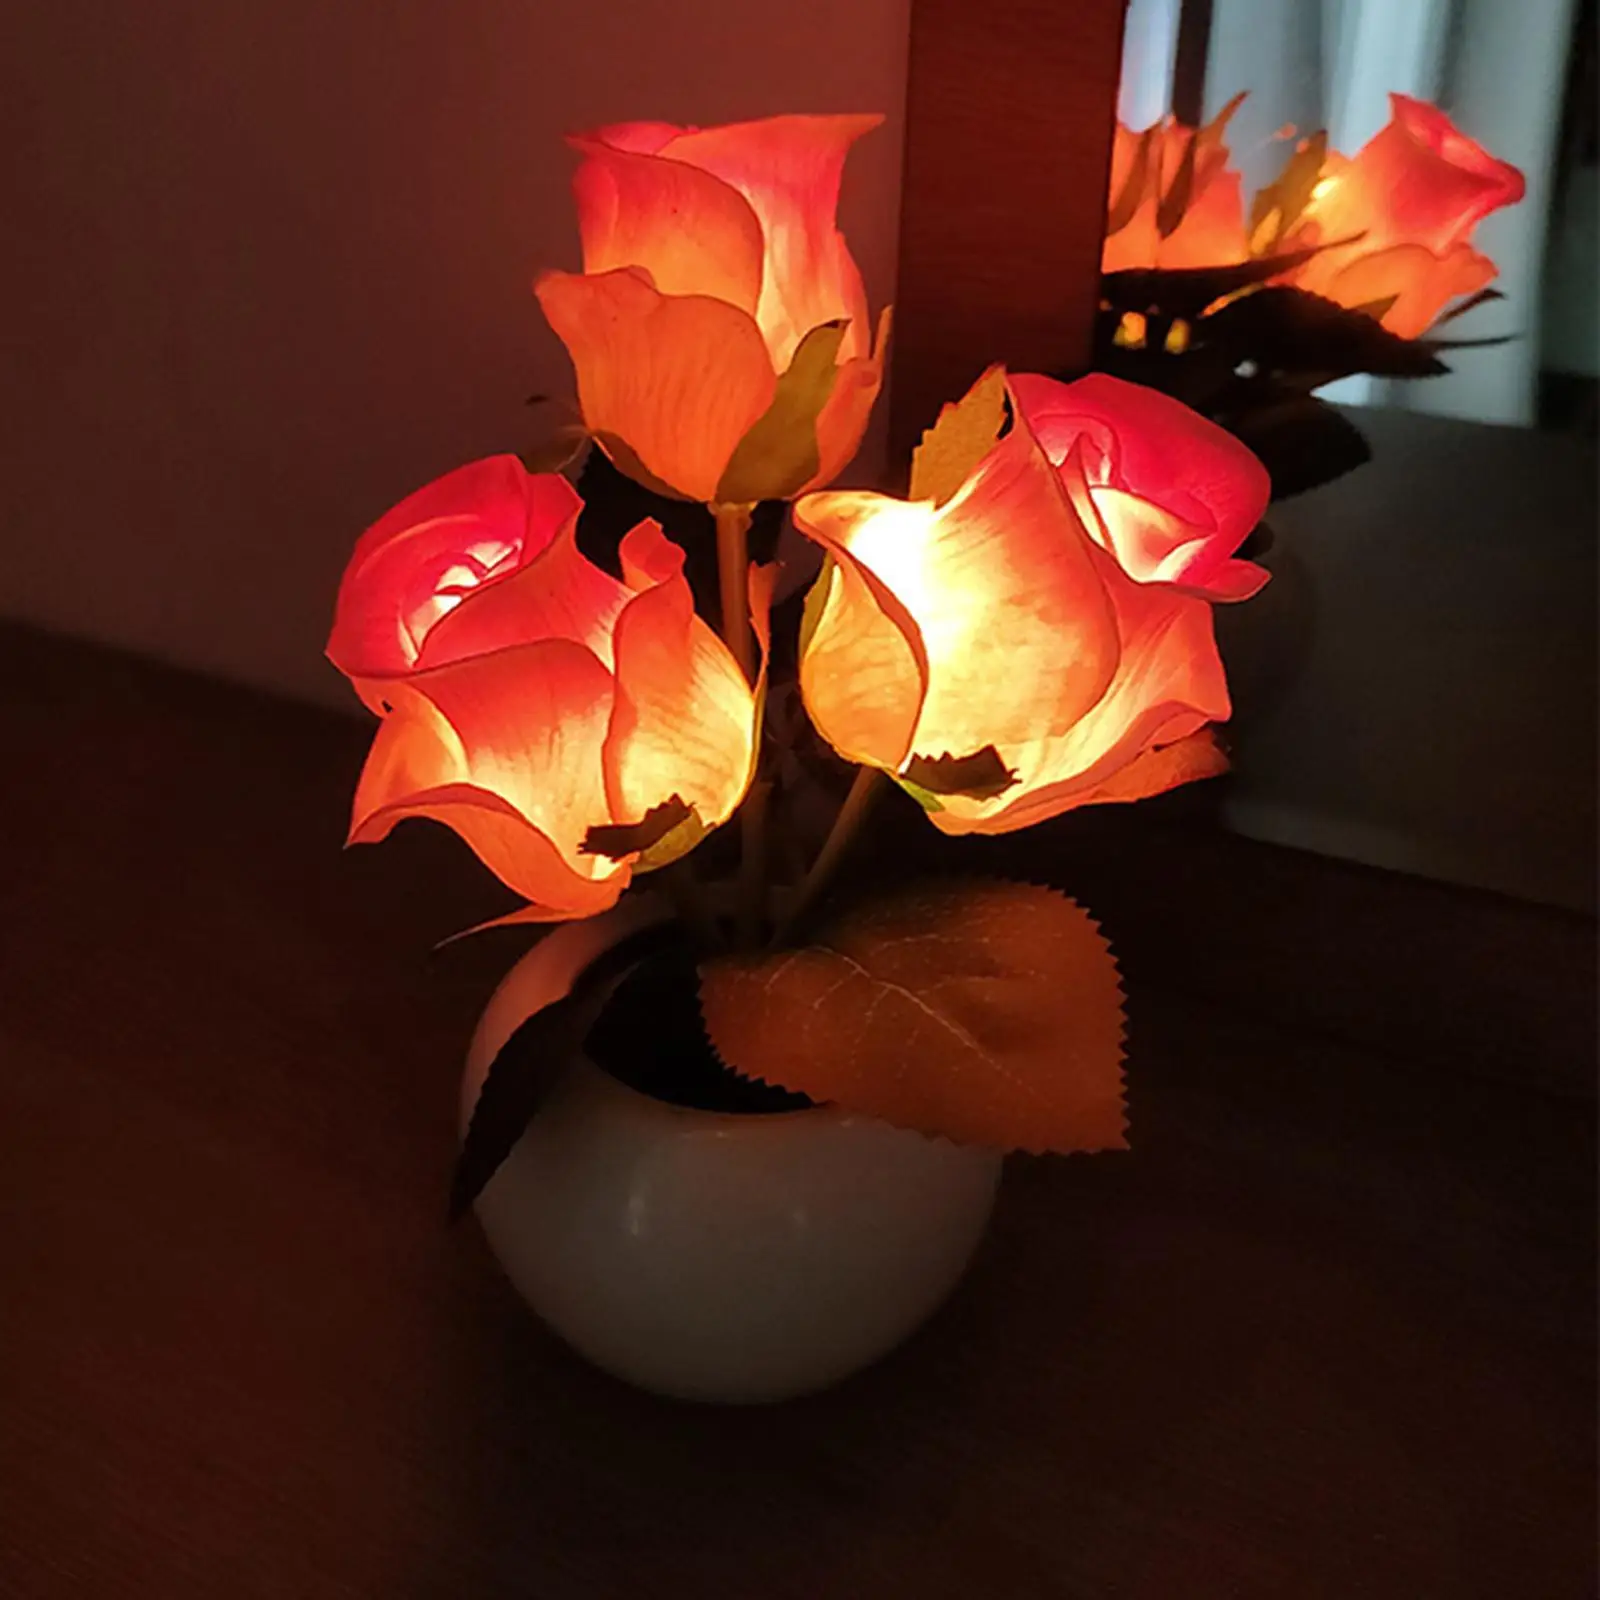 Night Light Artificial Flowers Gifts Flower Lamp Pot Stake Lights for Decorative Pathway Bedroom Yard Table Centerpieces